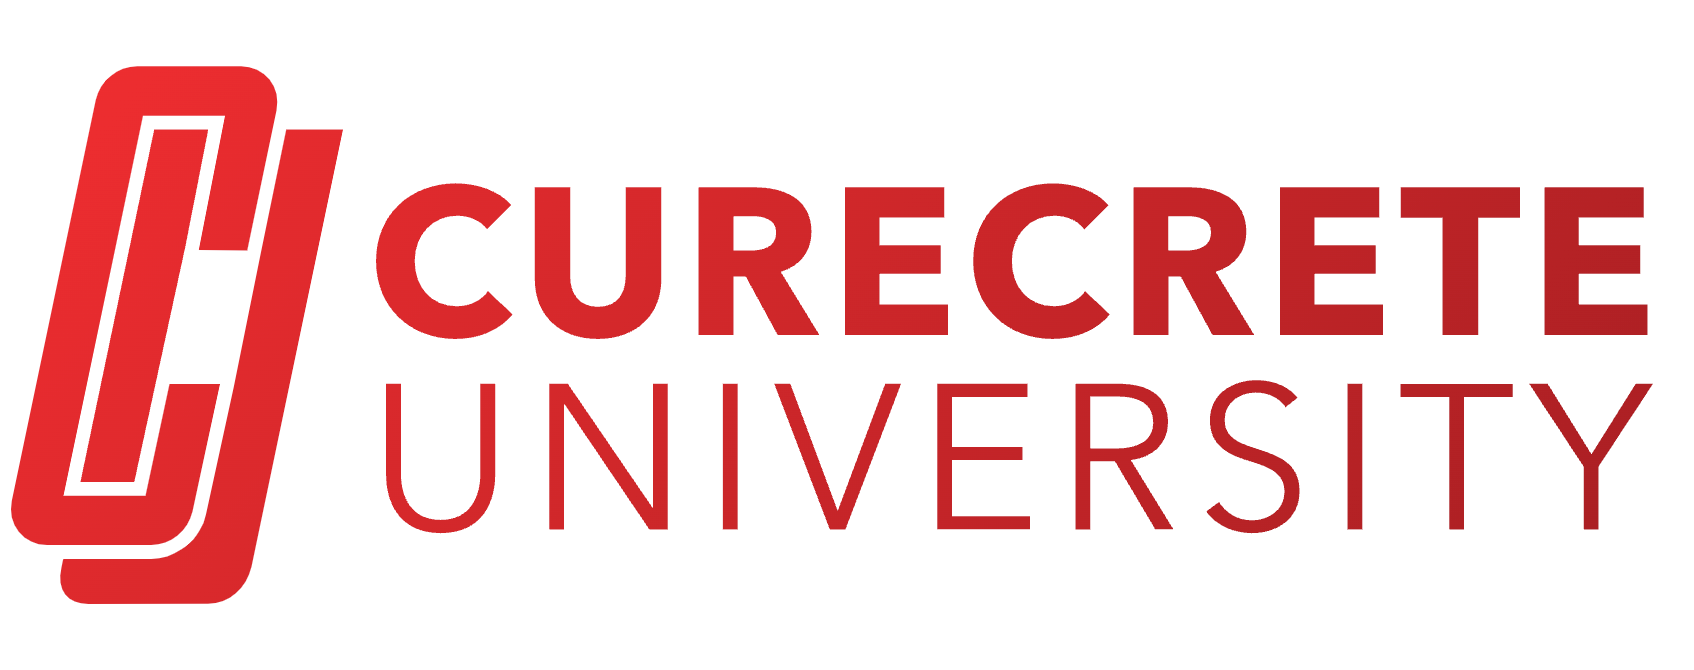 The logo for curecrete university is red and white.